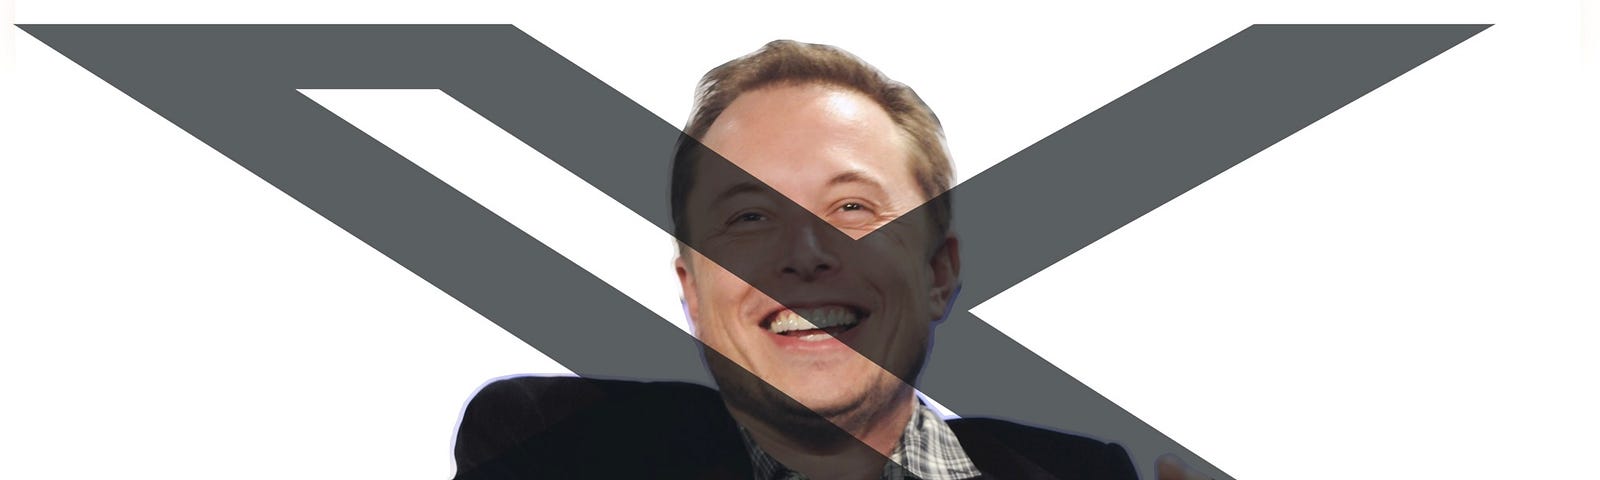 IMAGE: An image of an smiling Elon Musk on the logo of the talent show The X Factor, and with the X substituted by the X (formerly Twitter) logo